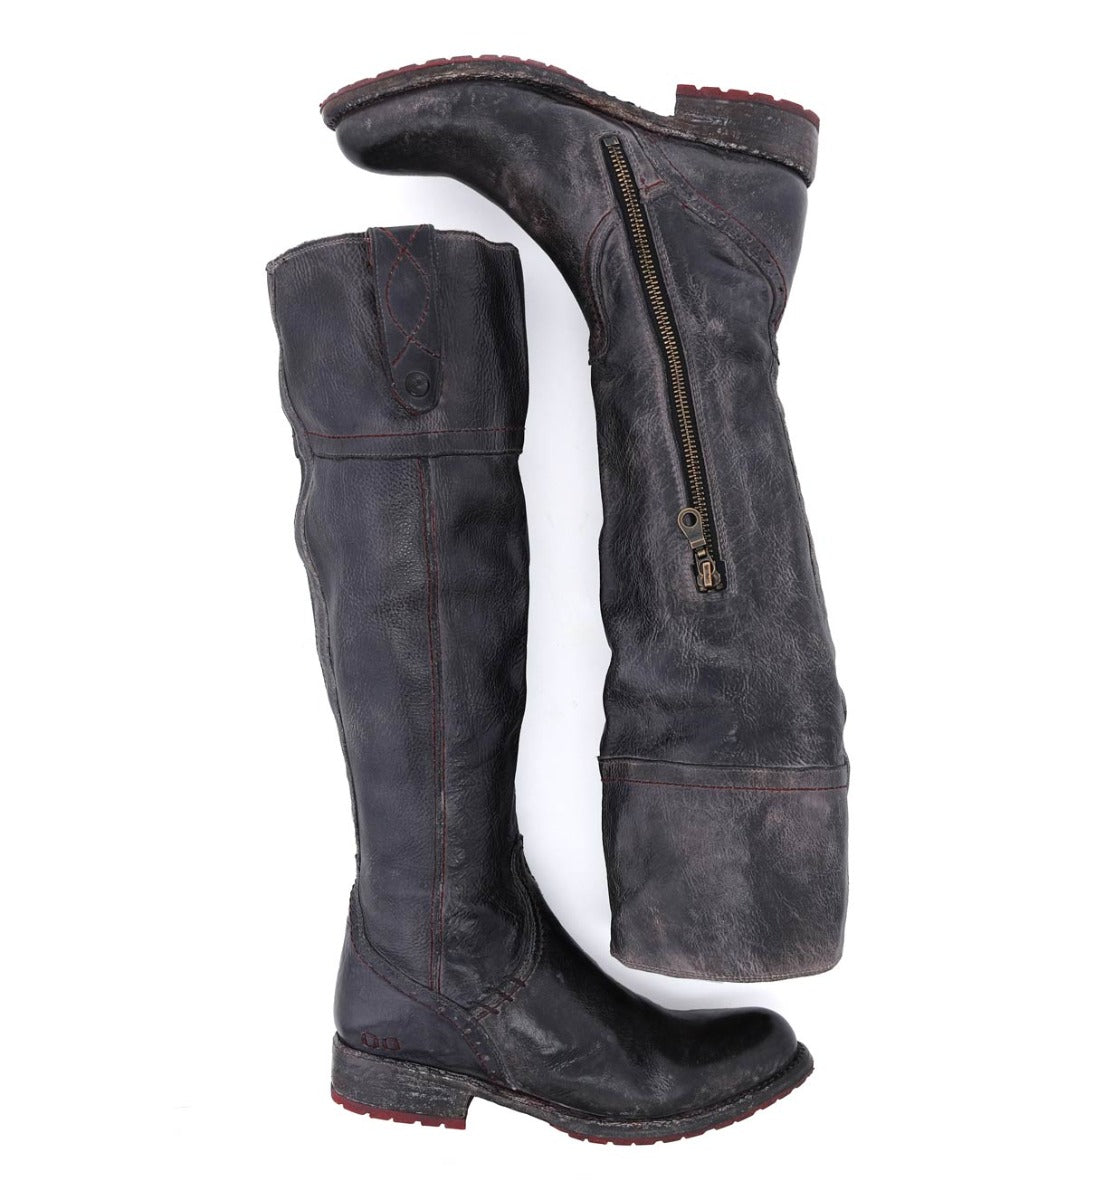 A pair of Jacqueline boots by Bed Stu with zippers on the side.